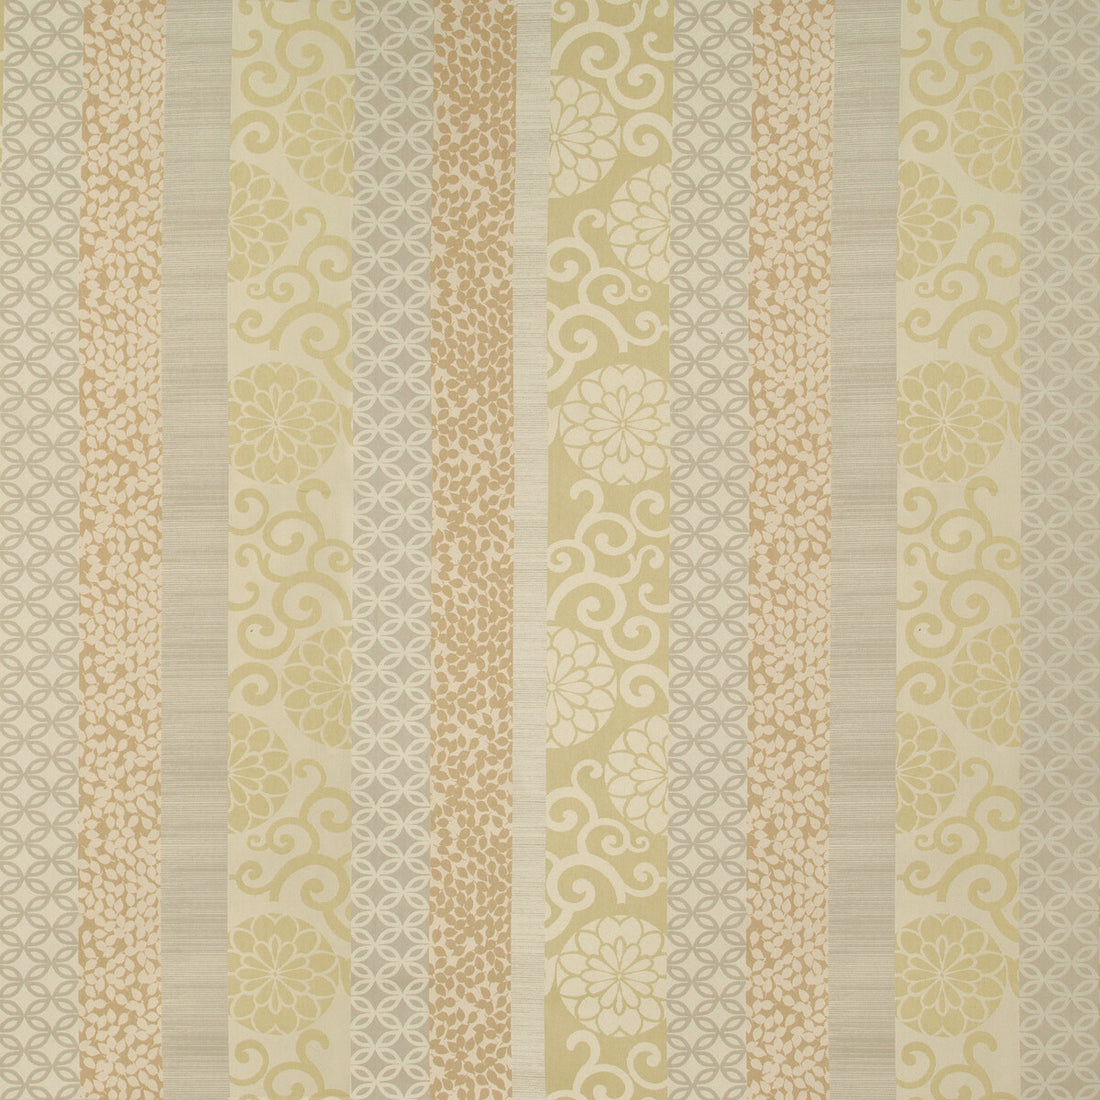 Kamala fabric in chai color - pattern 4628.416.0 - by Kravet Contract in the Privacy Curtains collection